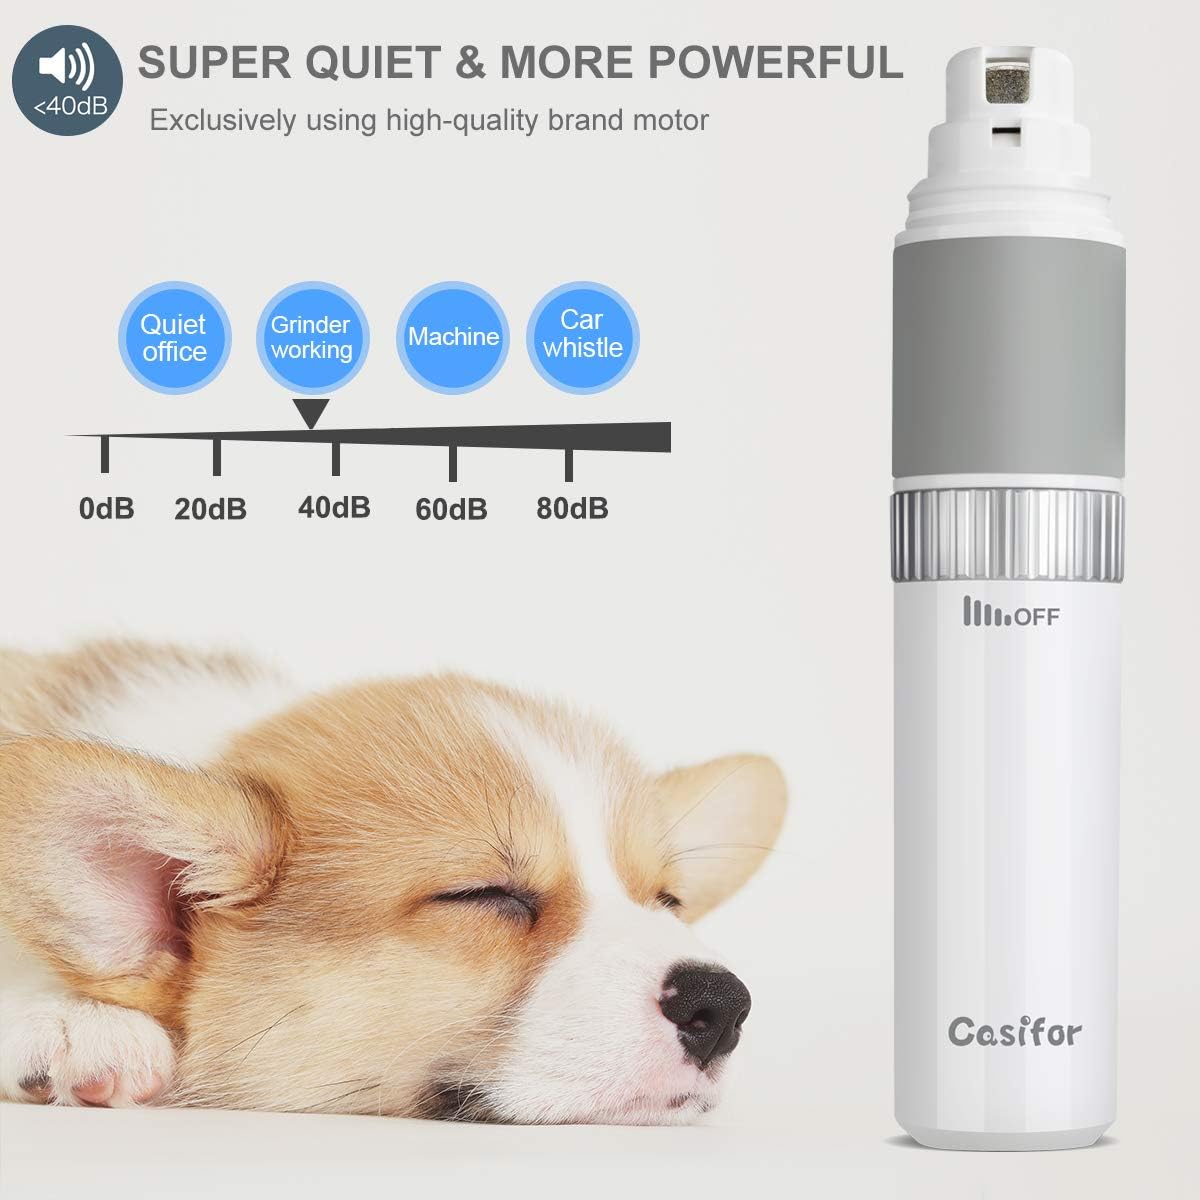 Casifor Dog Nail Grinder and Clippers Quiet with 20h Working Time Professional Pet Nail Trimmer Stepless Speed Regulation Pet Nail Grinder Eelectric Nail File for Large Medium Small Dogs and Cats